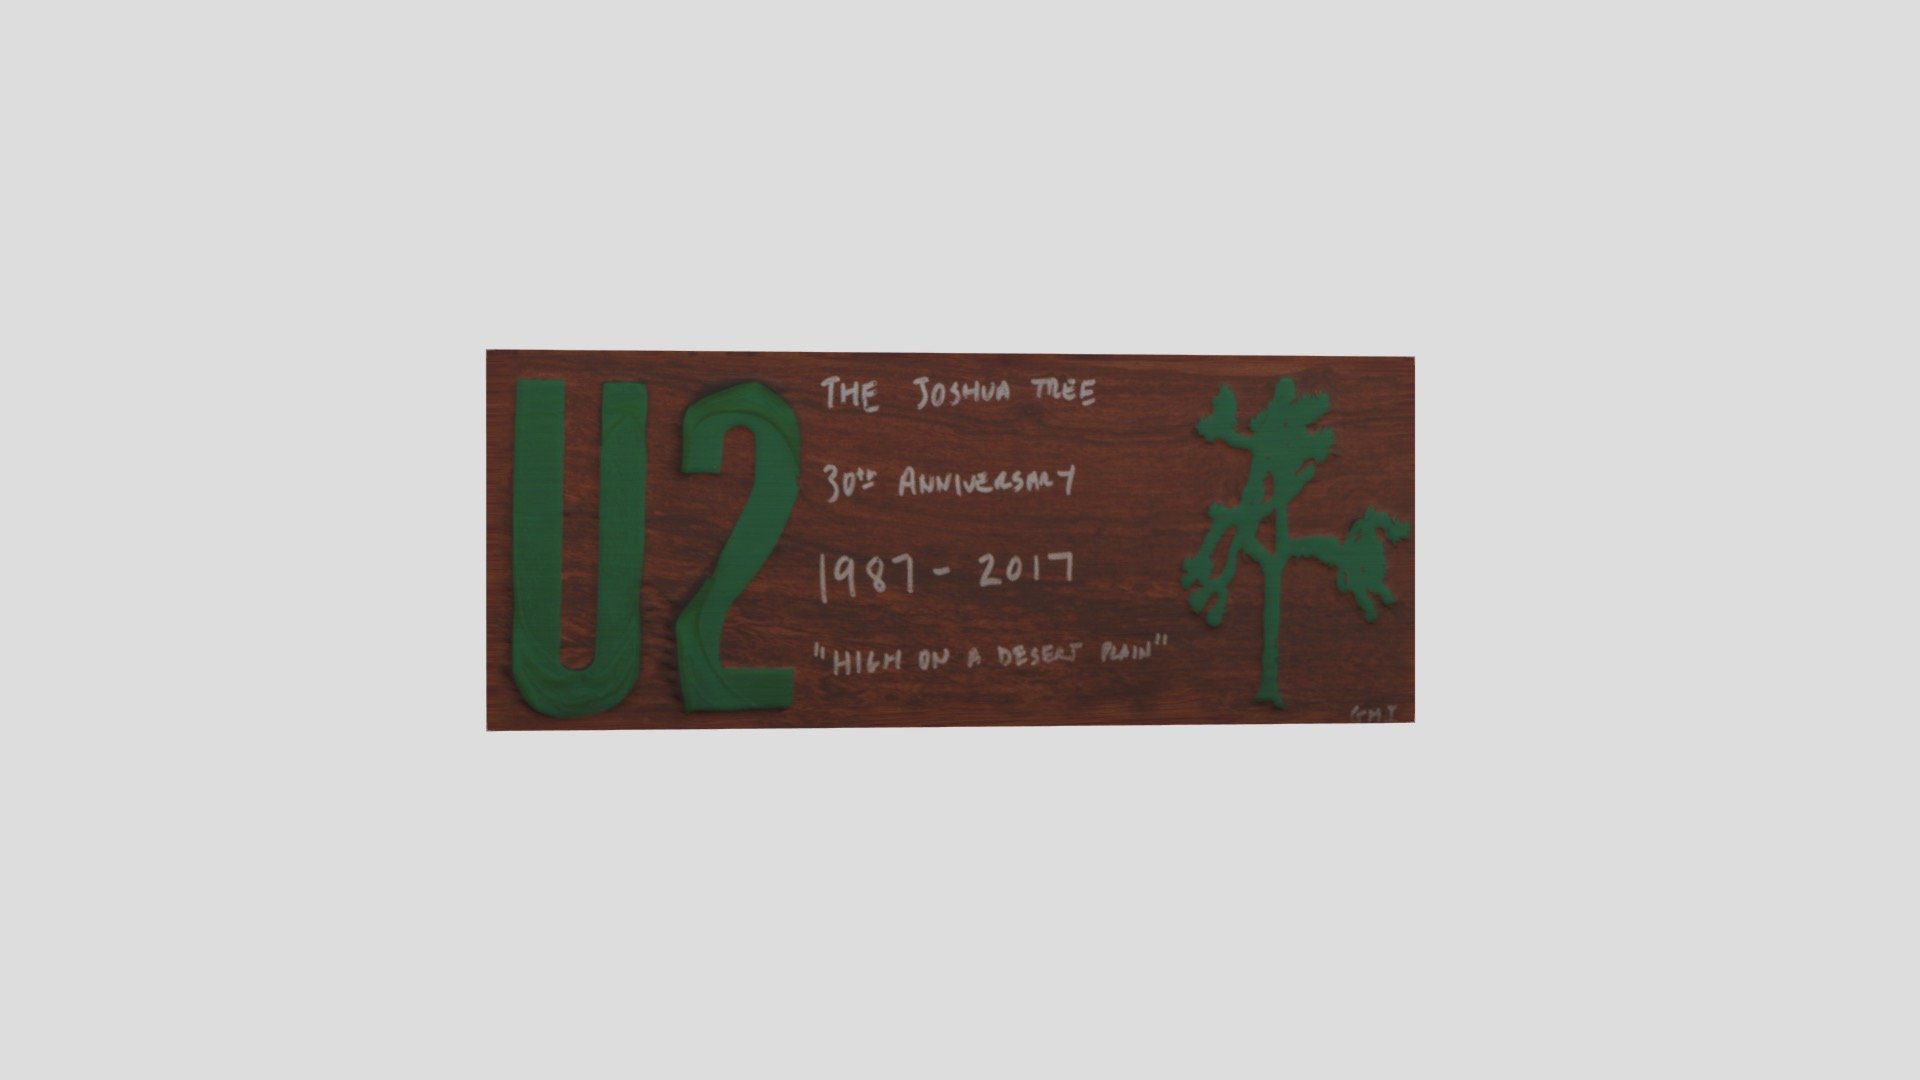 30 Anniversary plaque locasted at U2's Fallen joshua Tree
For more info, visit http://thejoshuatree.earth - 30th Anniversary Plaque: thejoshuatree.earth - 3D model by eplatero 3d model